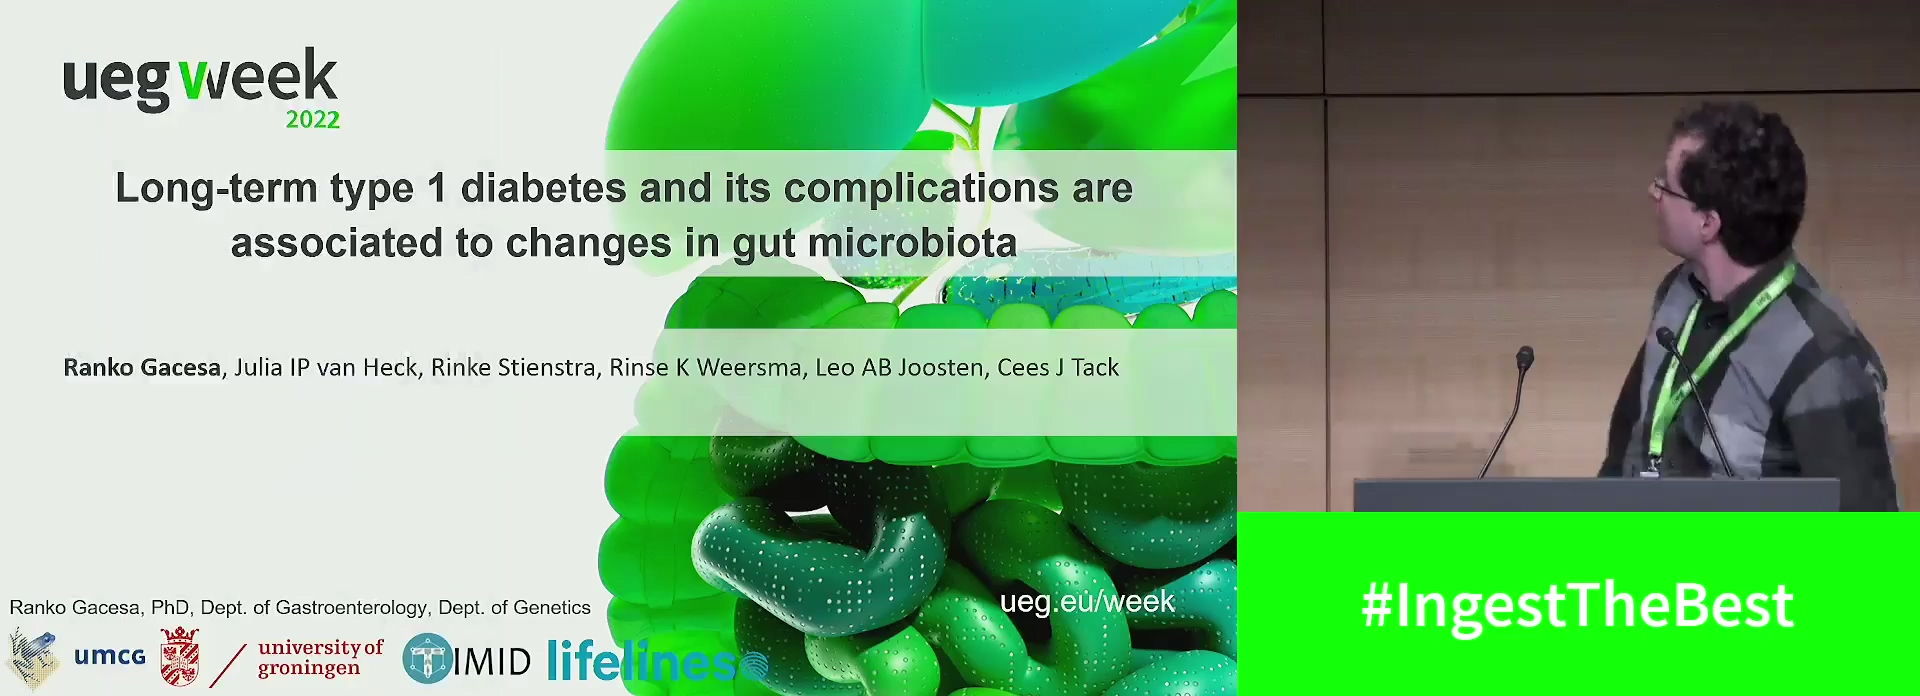 LONG-TERM TYPE 1 DIABETES AND ITS COMPLICATIONS ARE ASSOCIATED TO CHANGES IN GUT MICROBIOTA